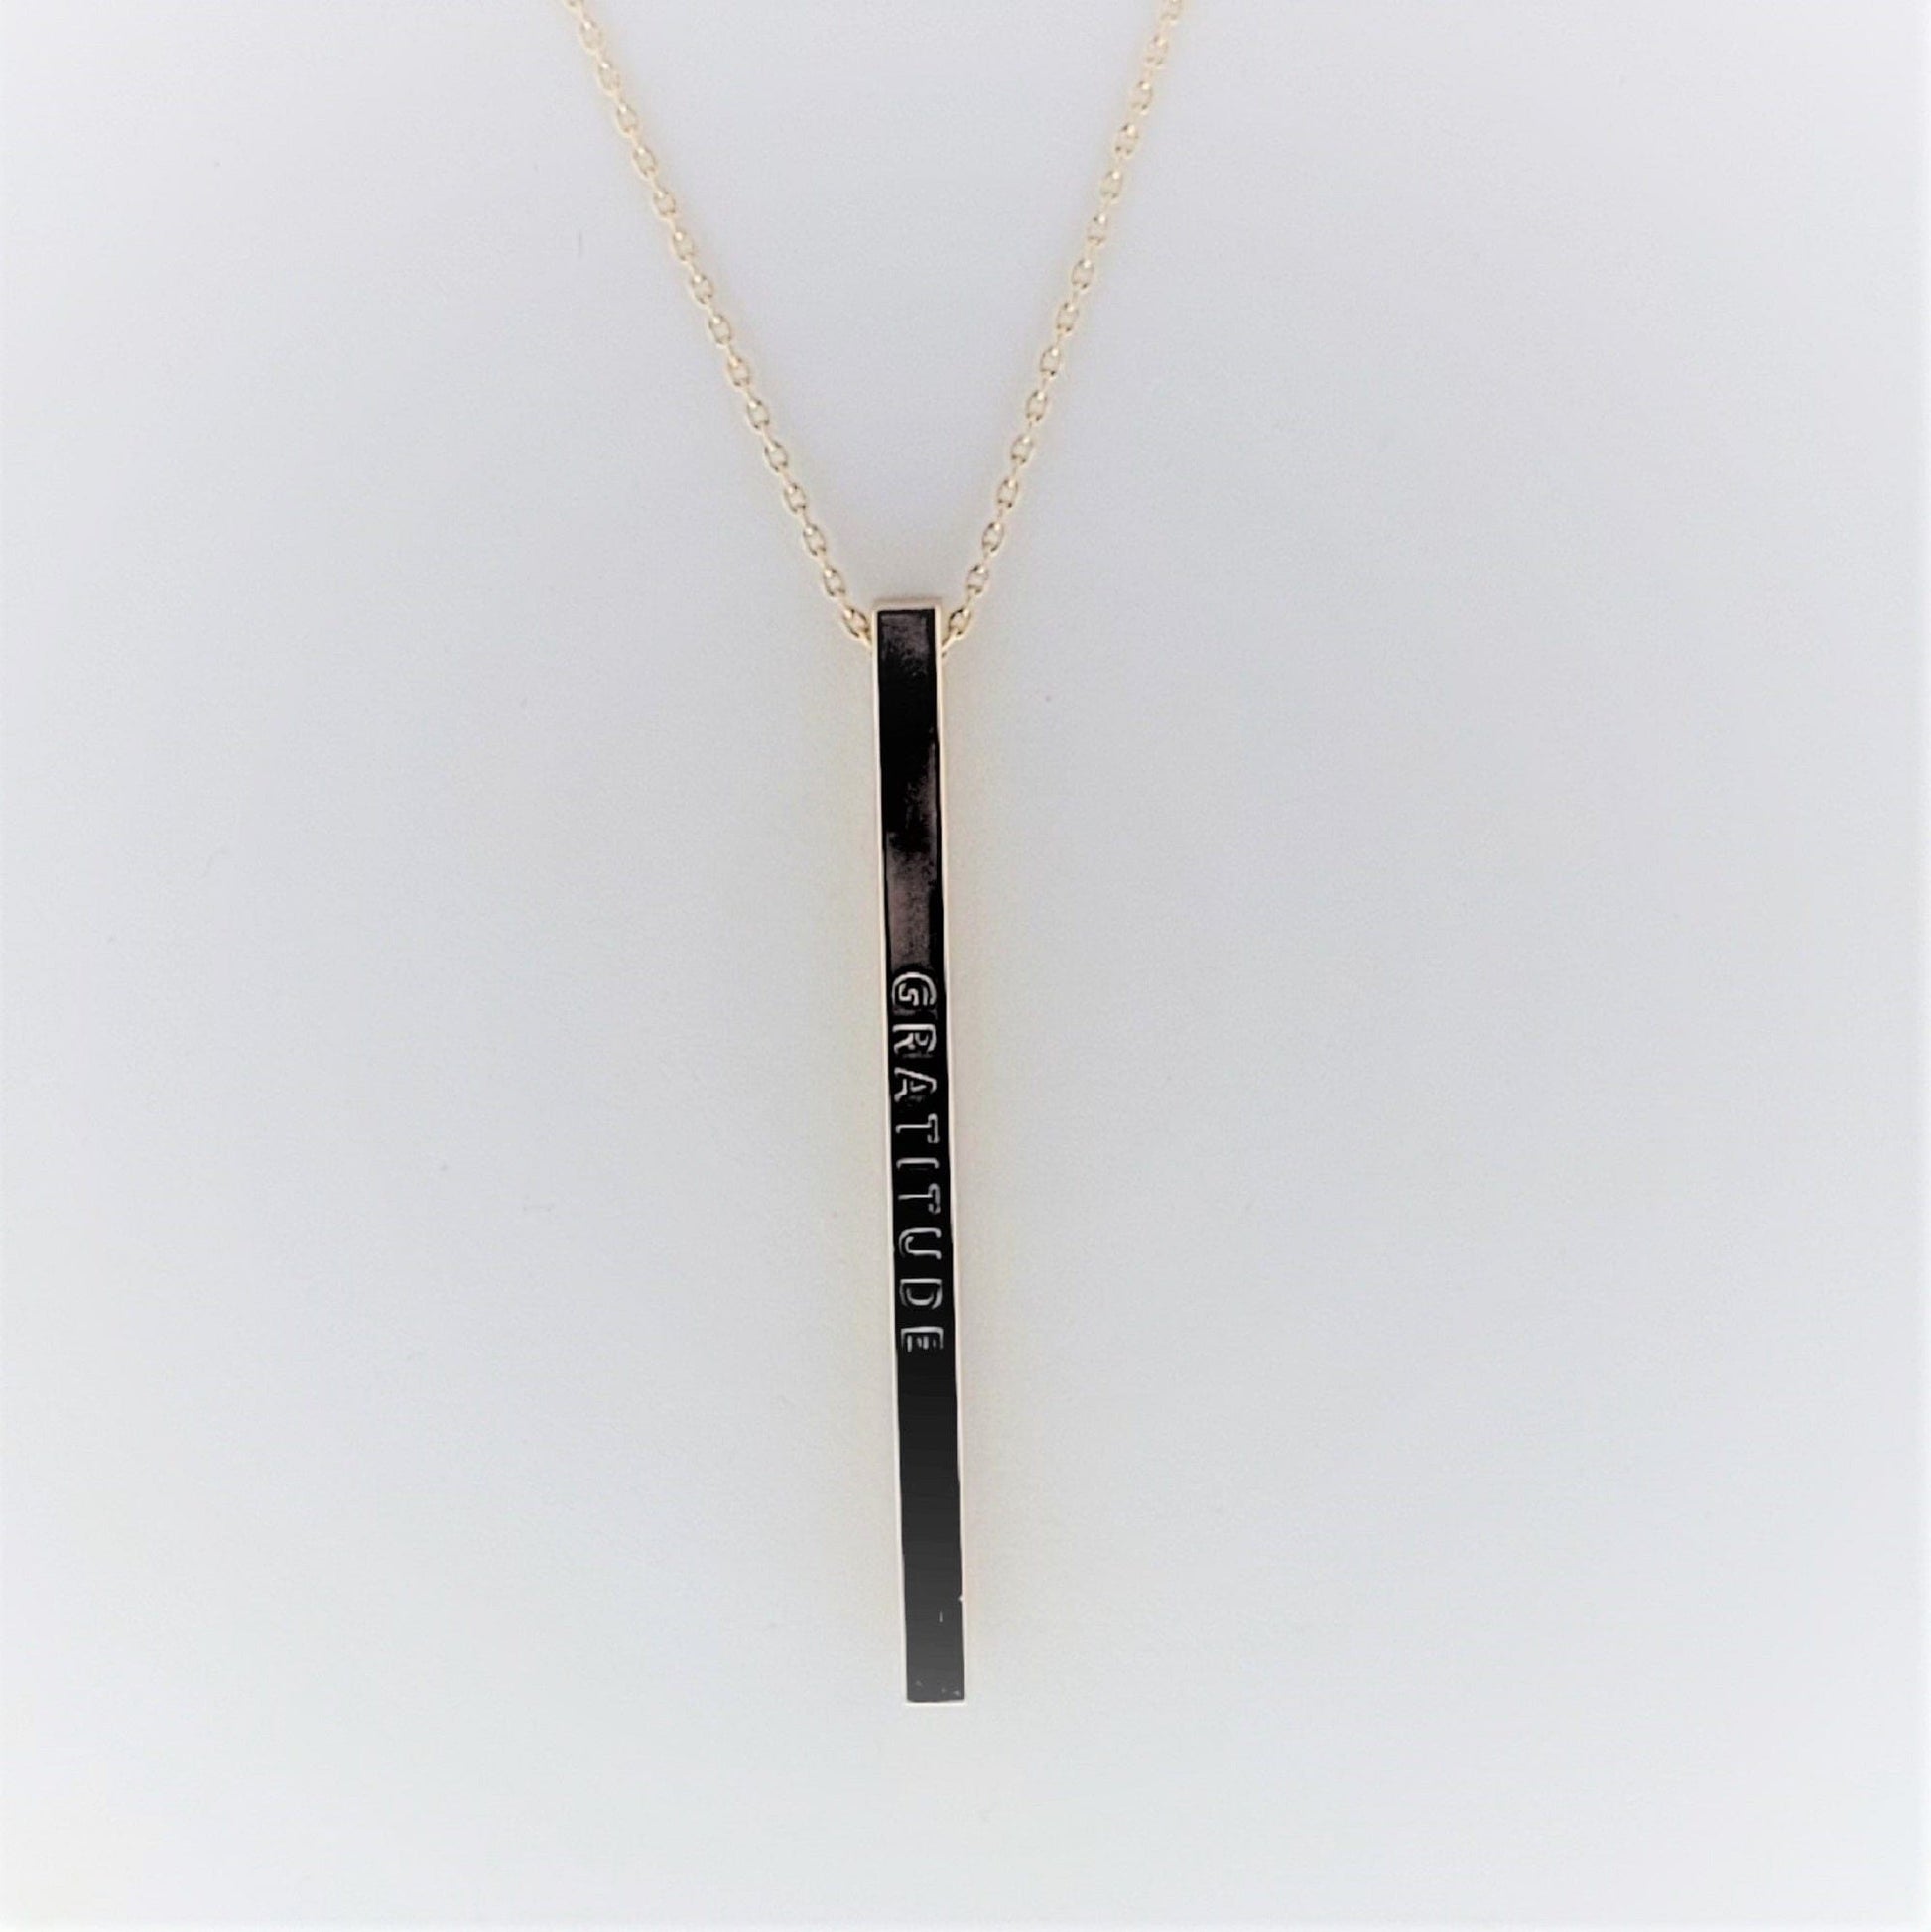 "Gratitude" Bar Necklace By Recovery Matters